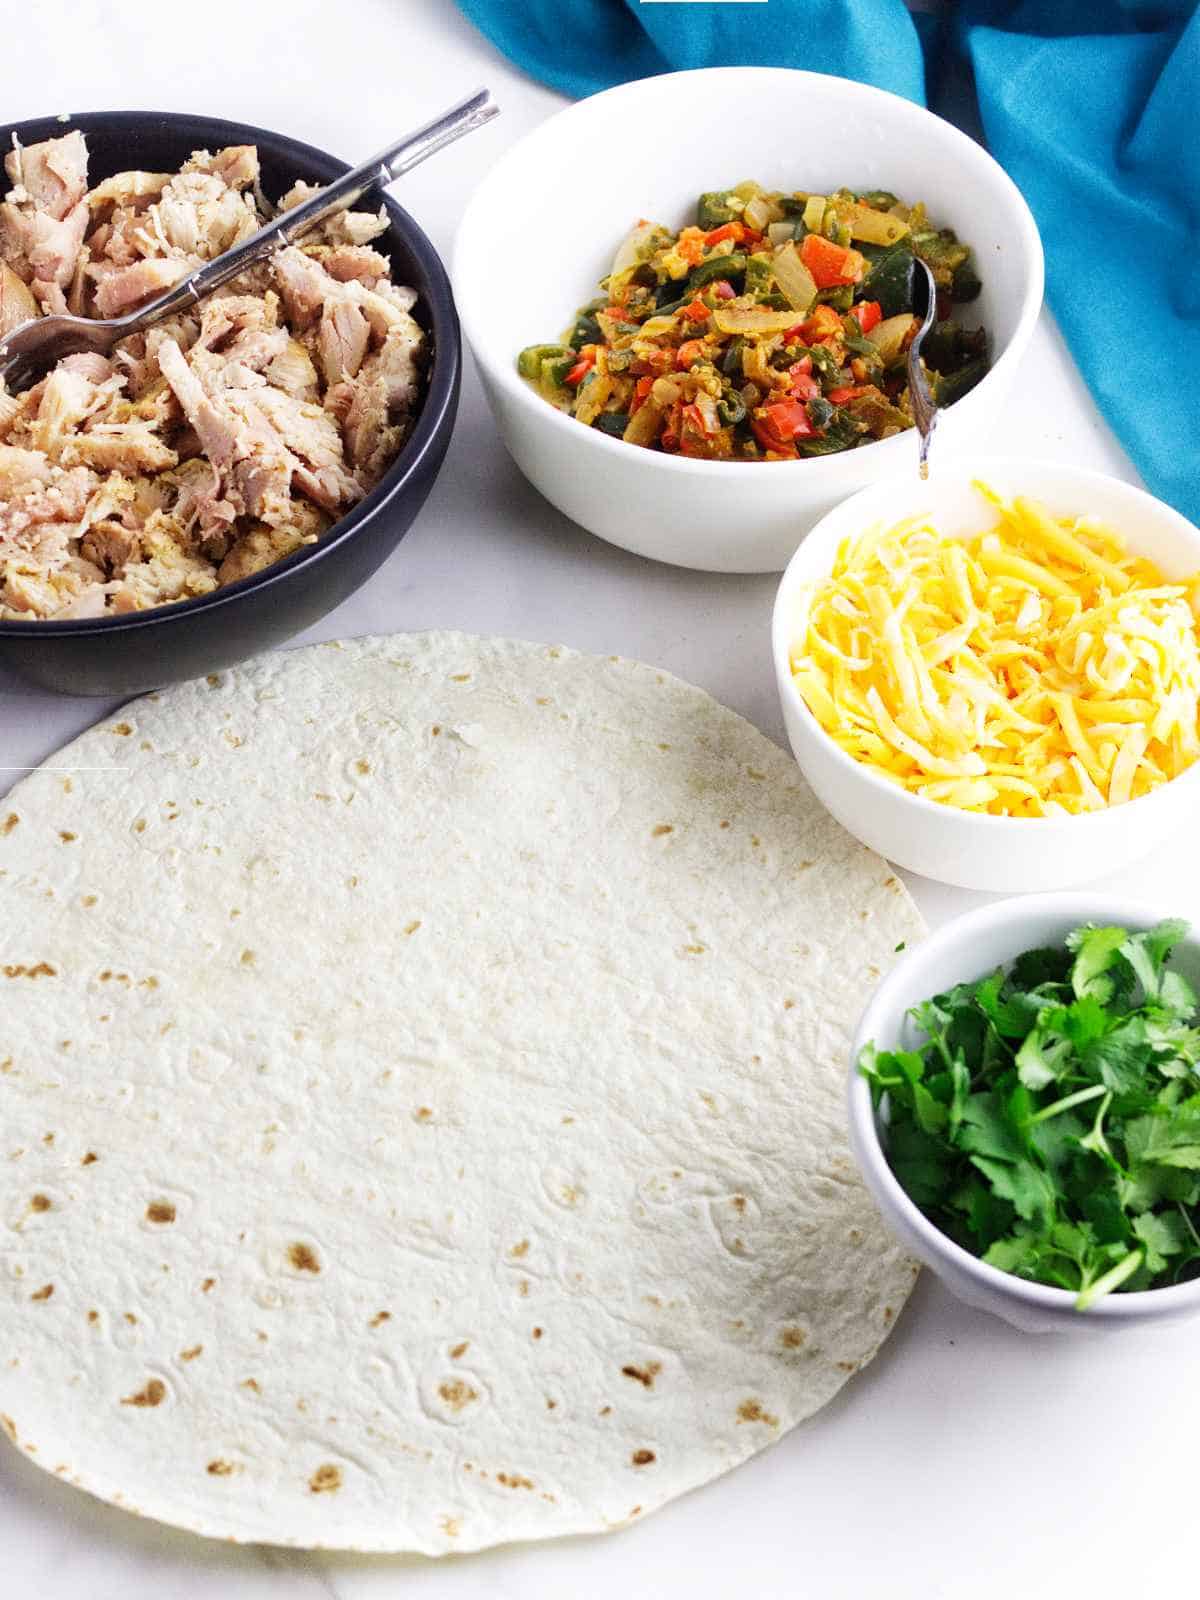 flour tortillas with bowls of shredded chicken, shredded cheese, sauteed peppers and onions, and chopped cilantro.